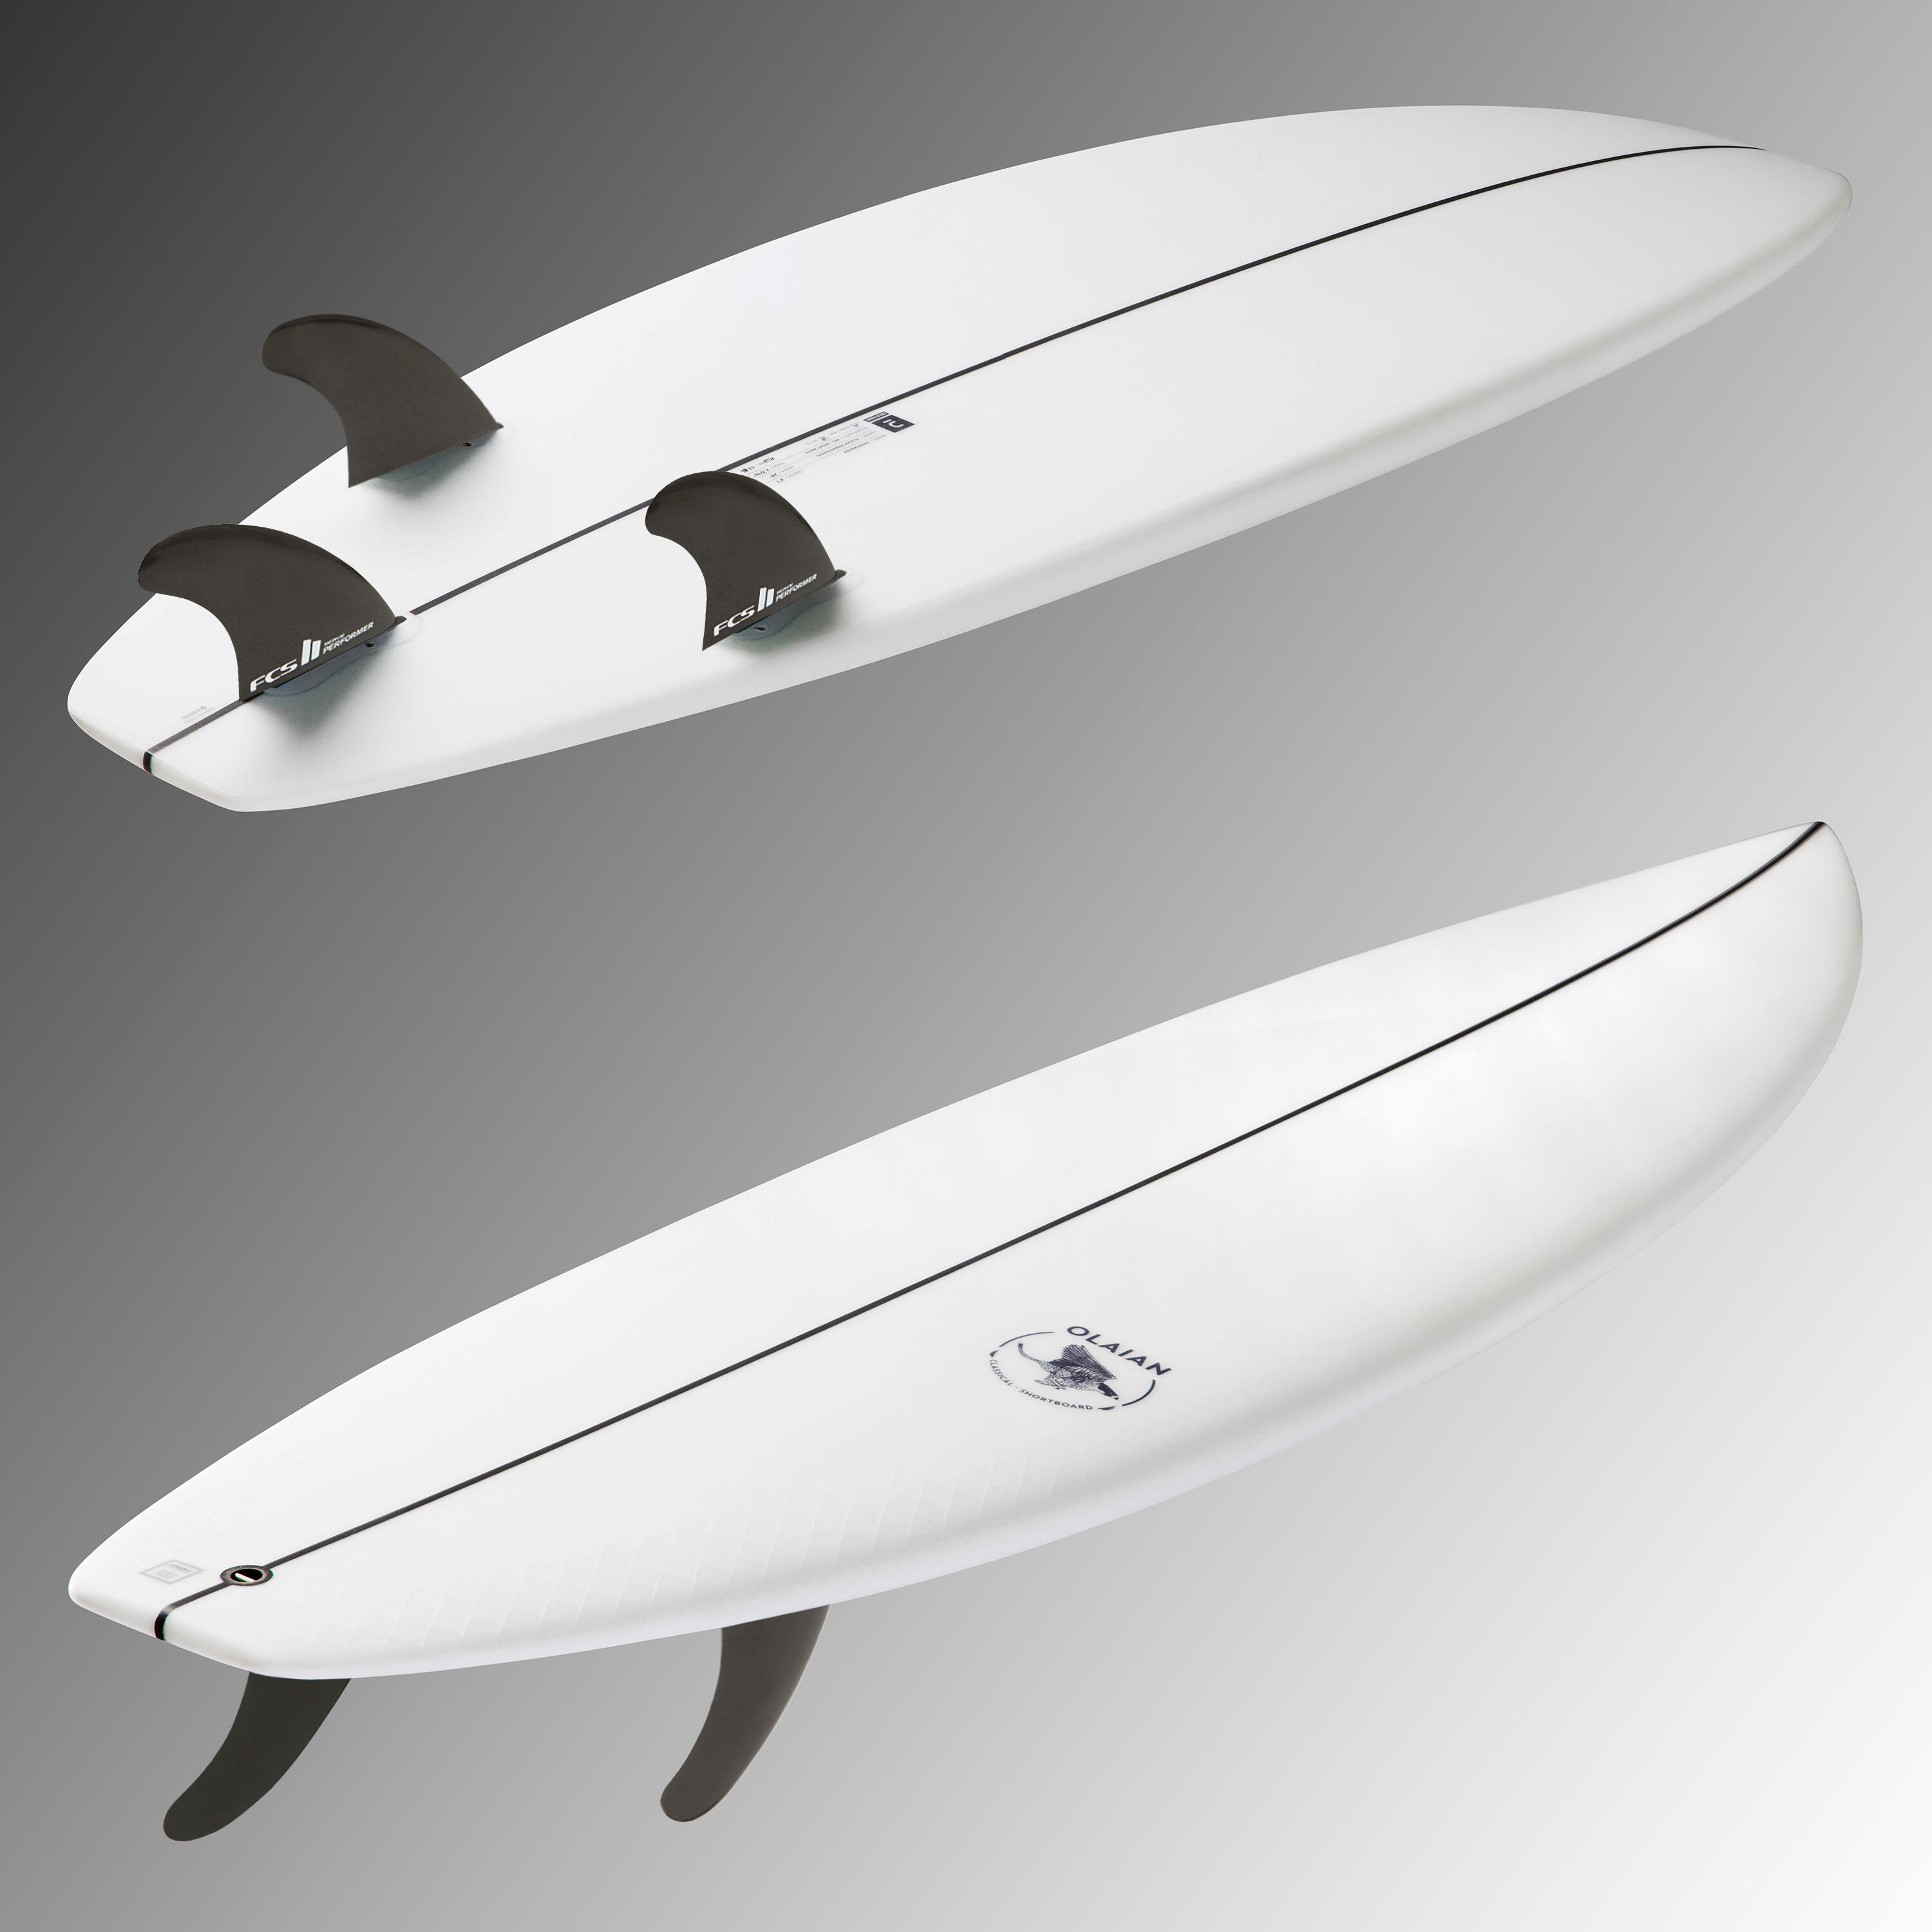 SHORTBOARD 900 6'3" 35 L. Supplied with 3 FCS2 fins 4/13